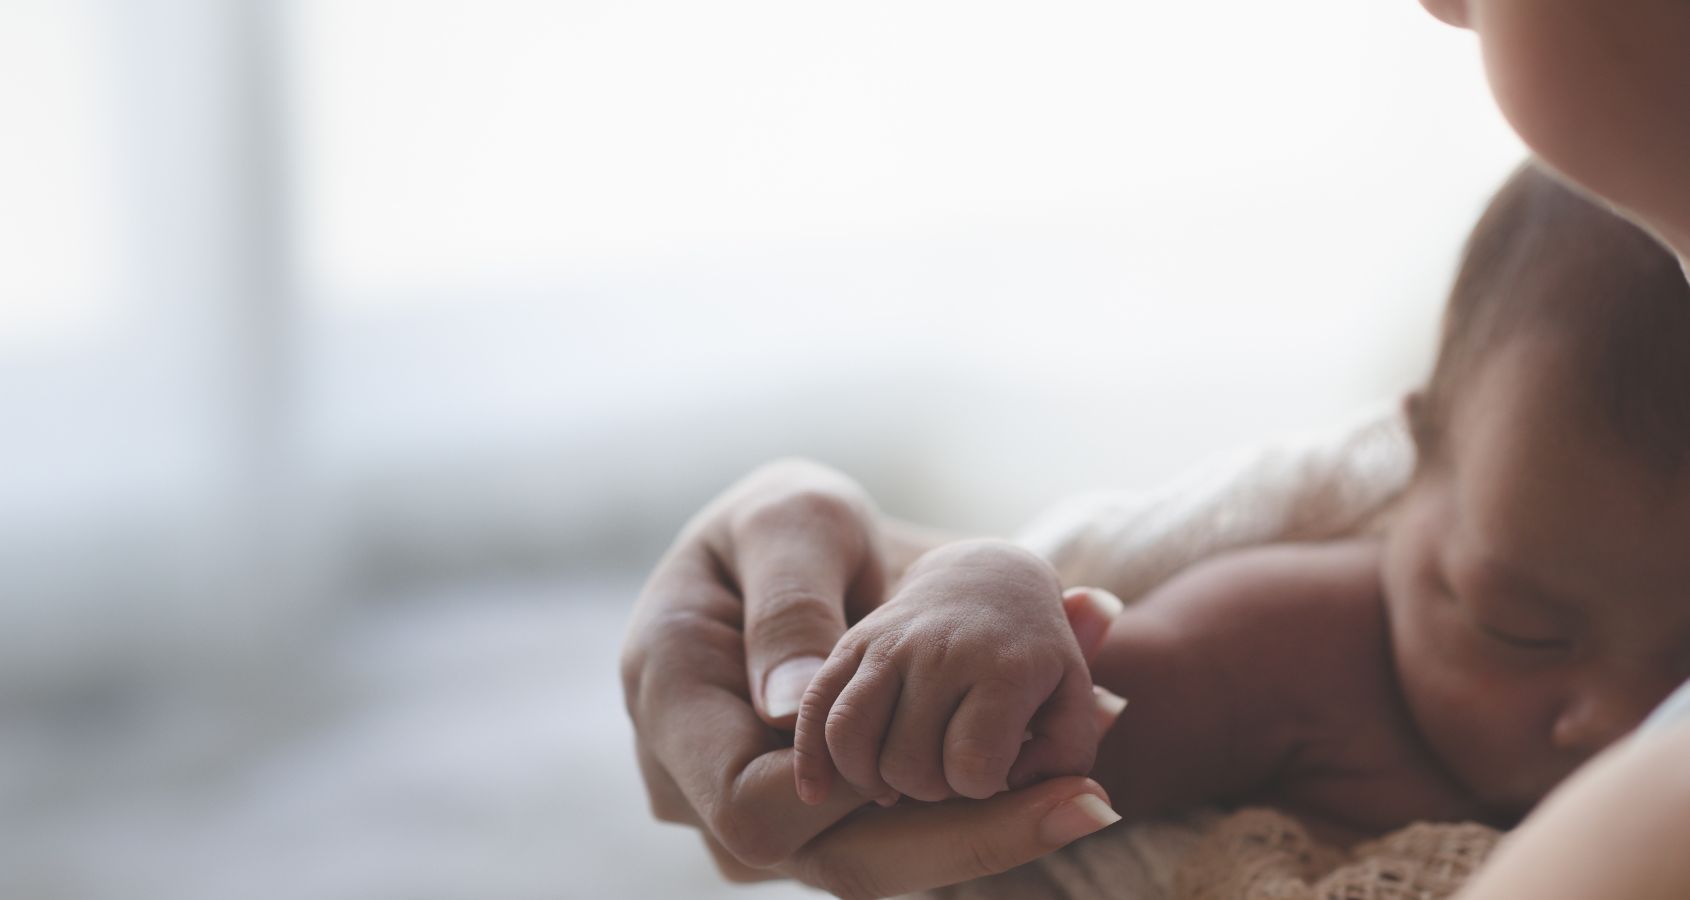 close-up-mother-holding-hands-asian-female-newborn-baby-and-sunlight-in-the-morning-concept-representing-medical-negligence-stillbirth-and-neonatal-compensation-claims